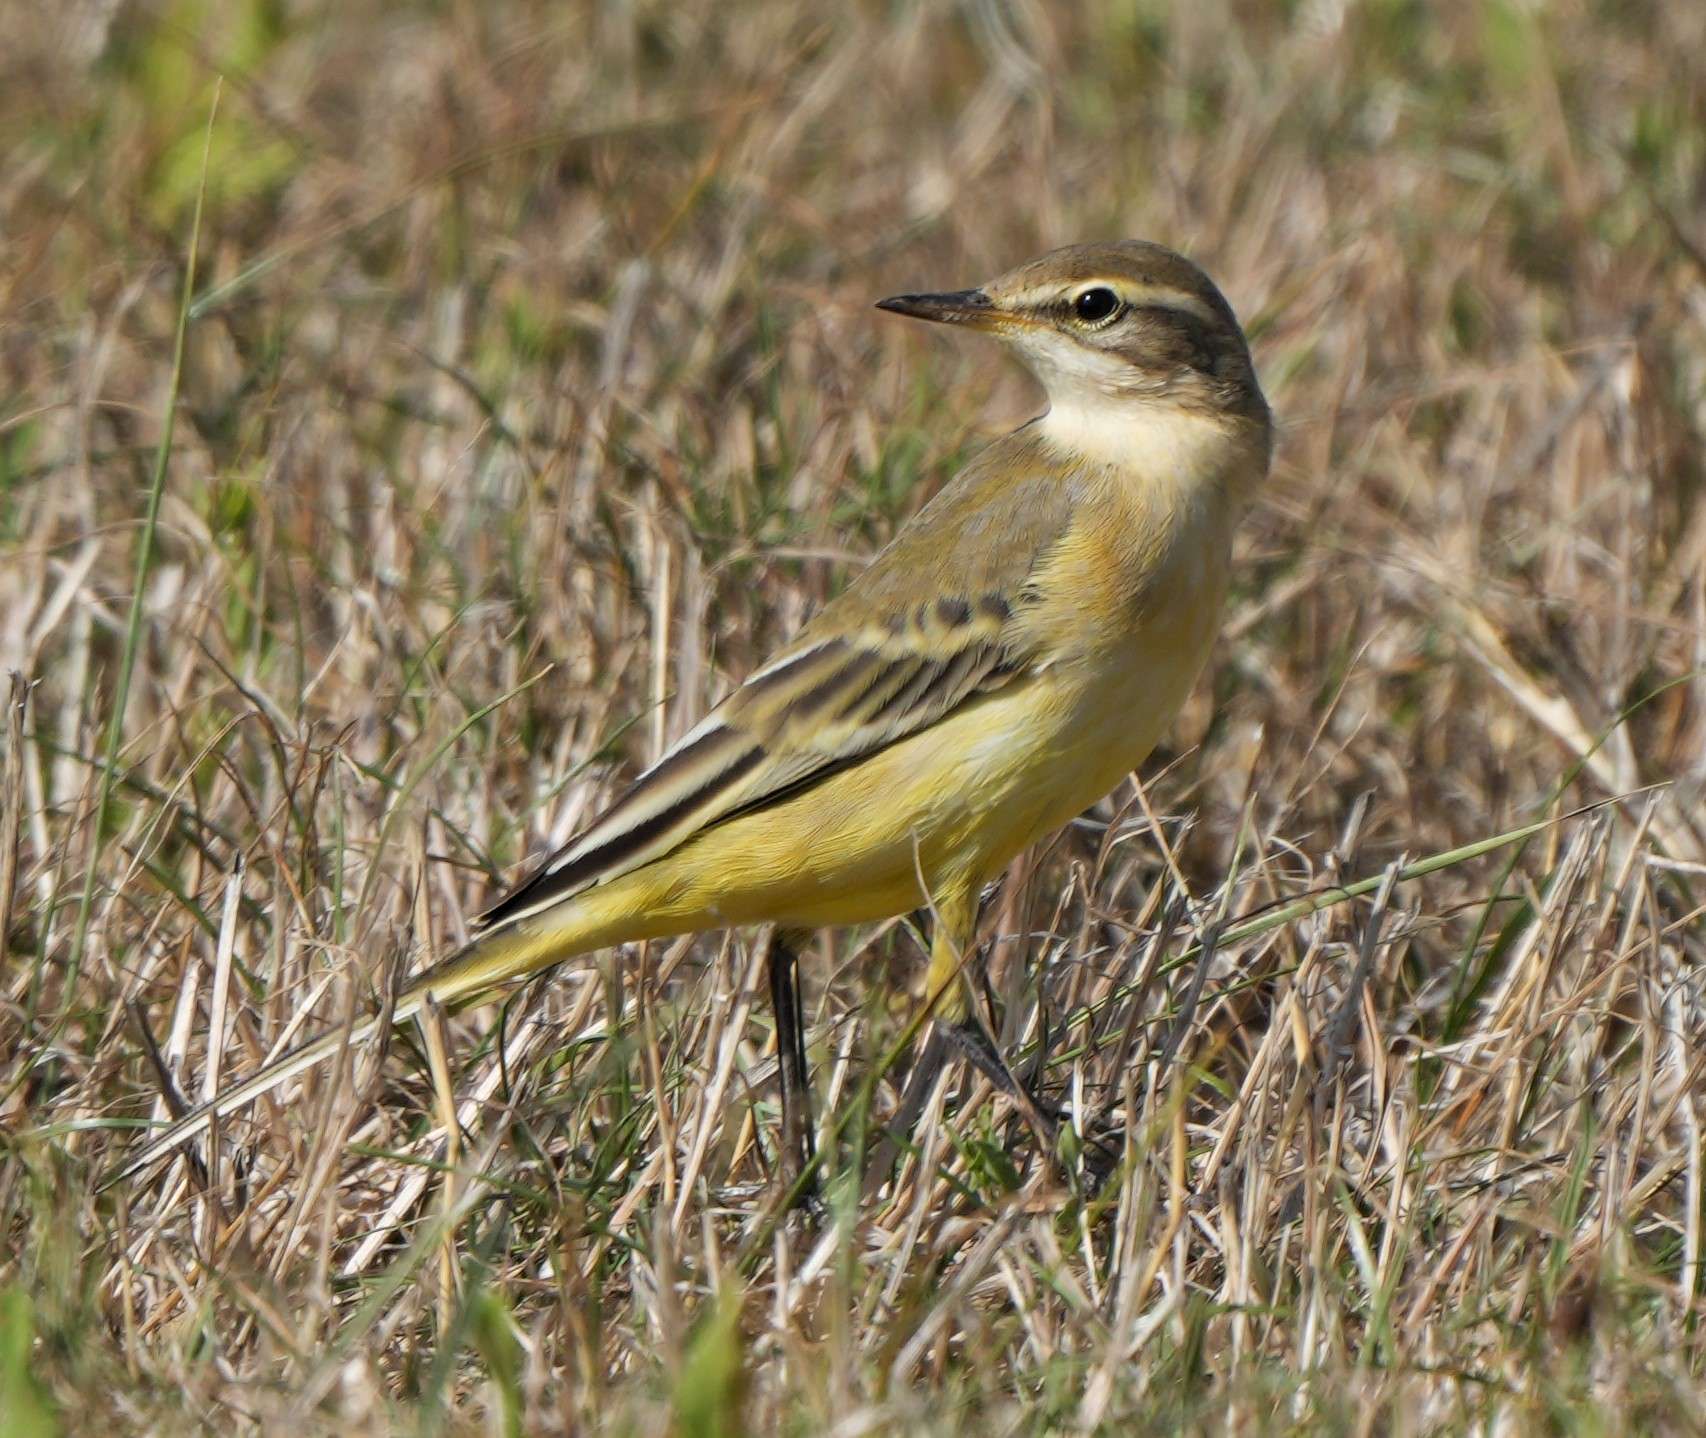 Yellow Wagtail by Paul Howrihane at Orcombe Point